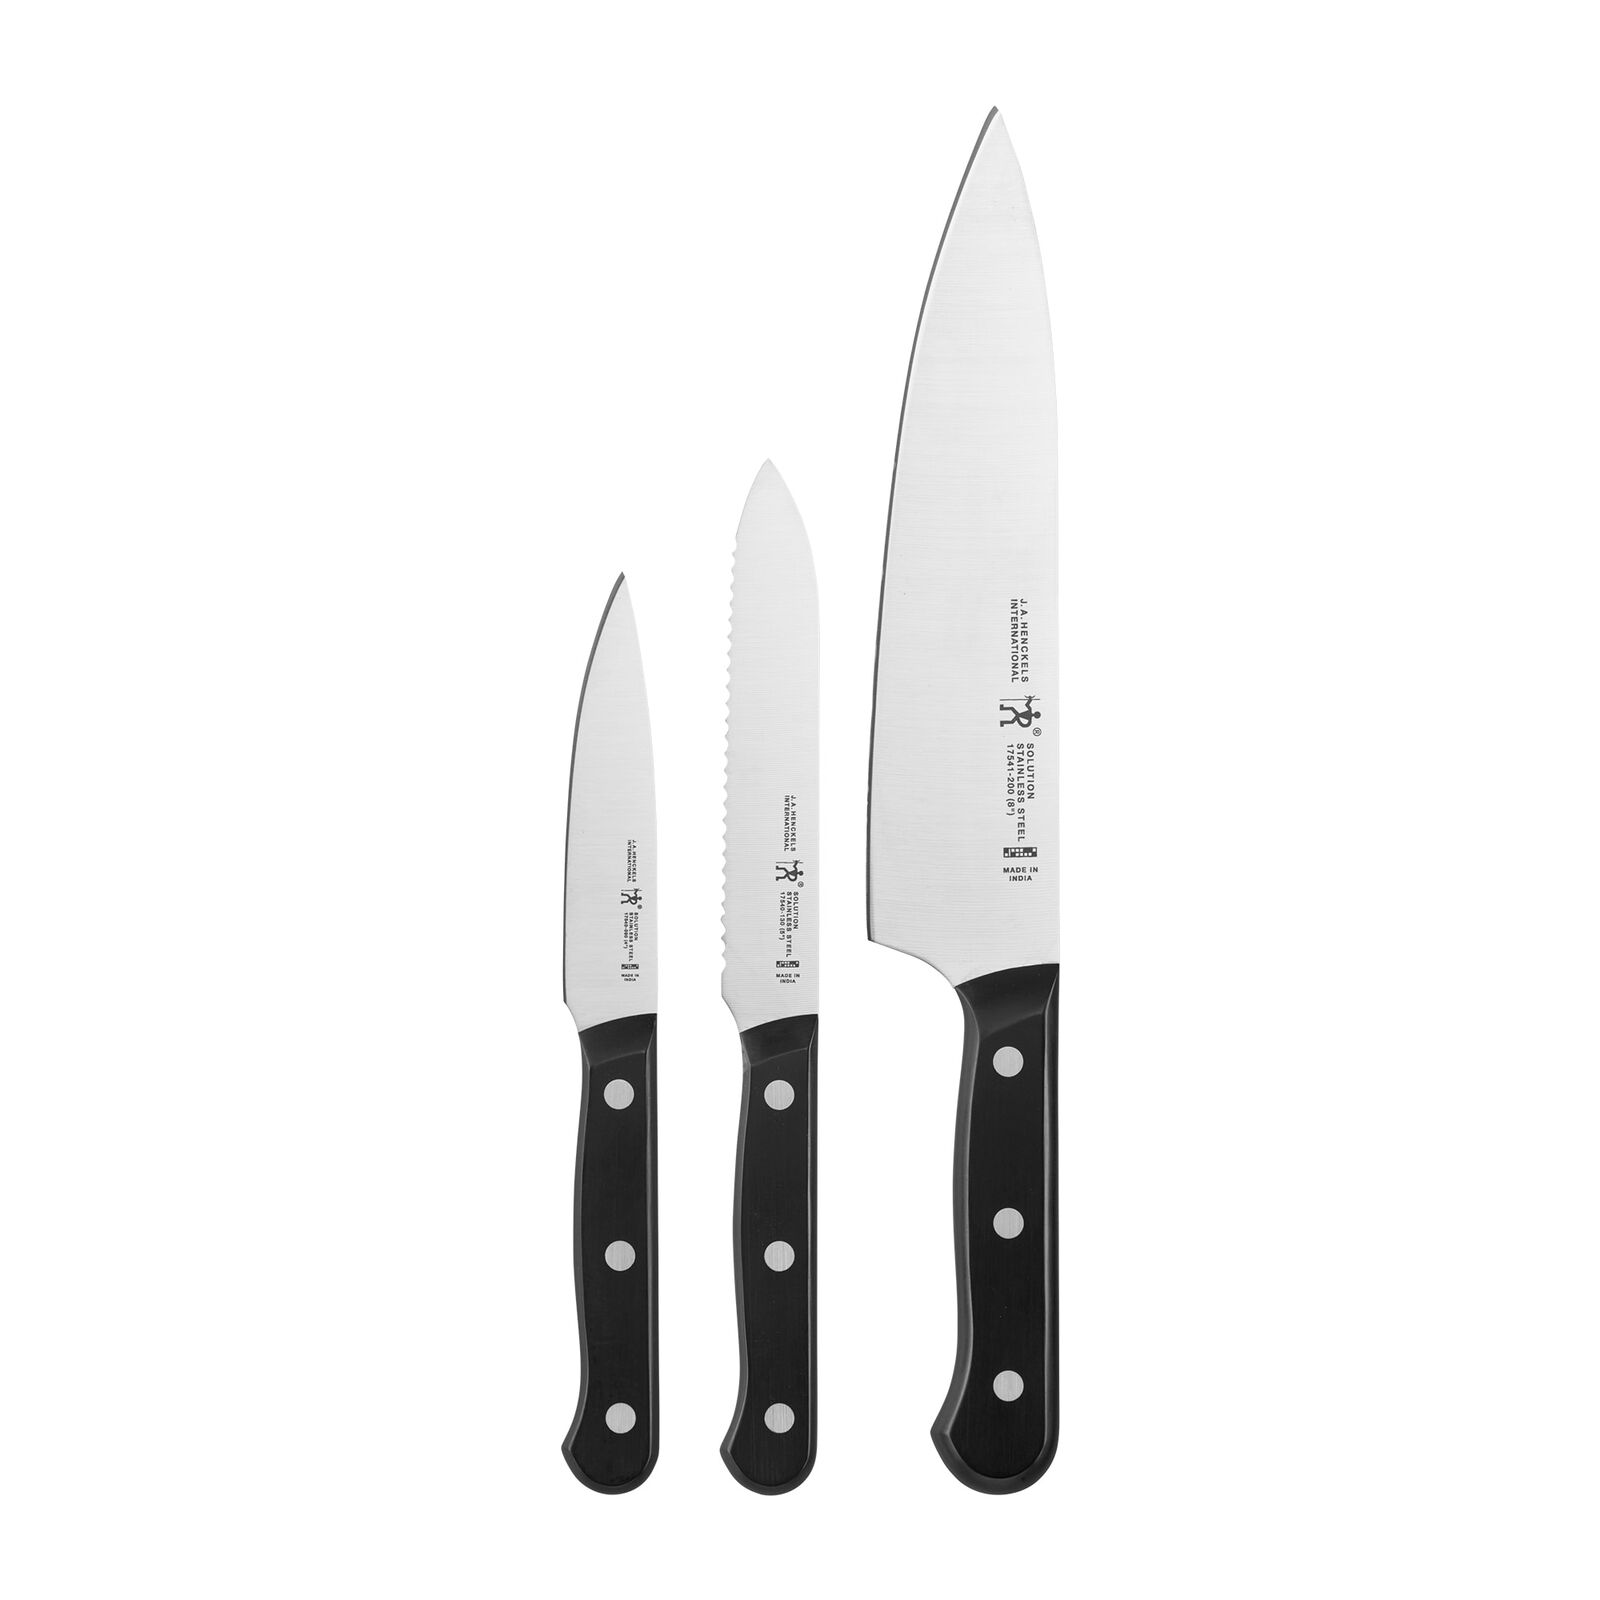 Stainless Steel 3-Piece Knife Set - Durable, Precision-Stamped Blades - Professi